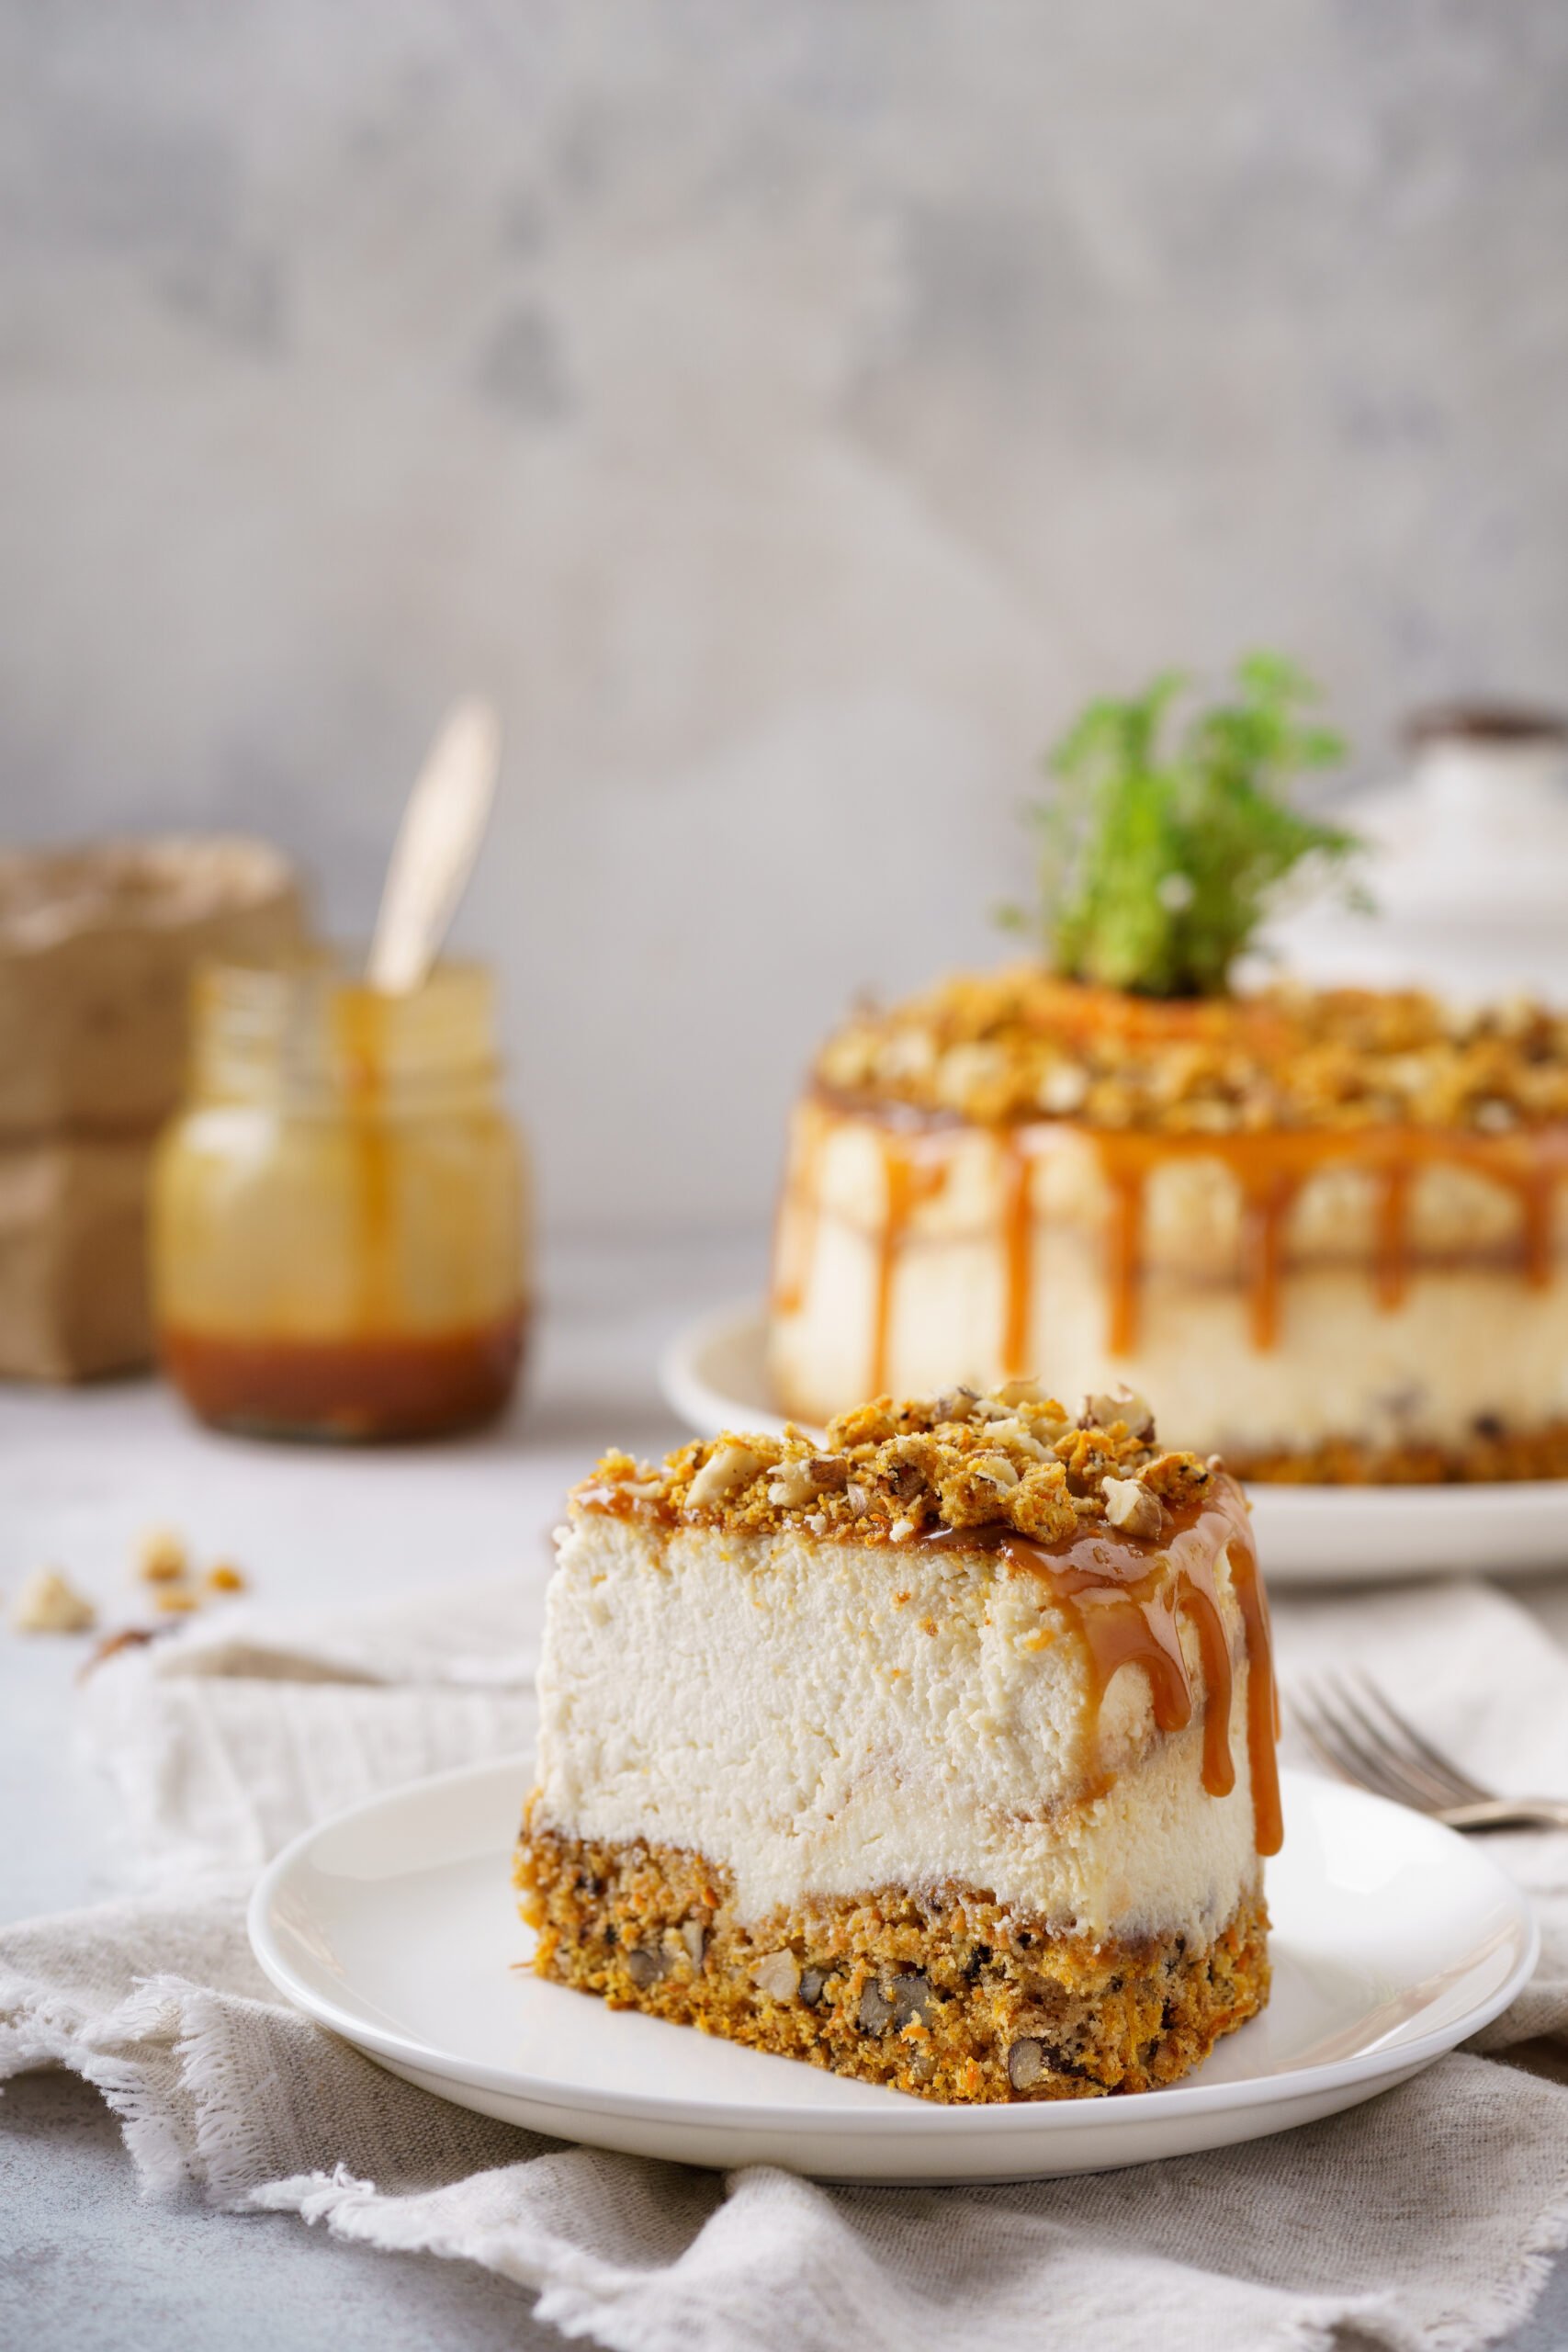 This Caramel Carrot Cheesecake has a carrot cake nutty base with a thick creamy caramel cheesecake topped with salted caramel and nuts.